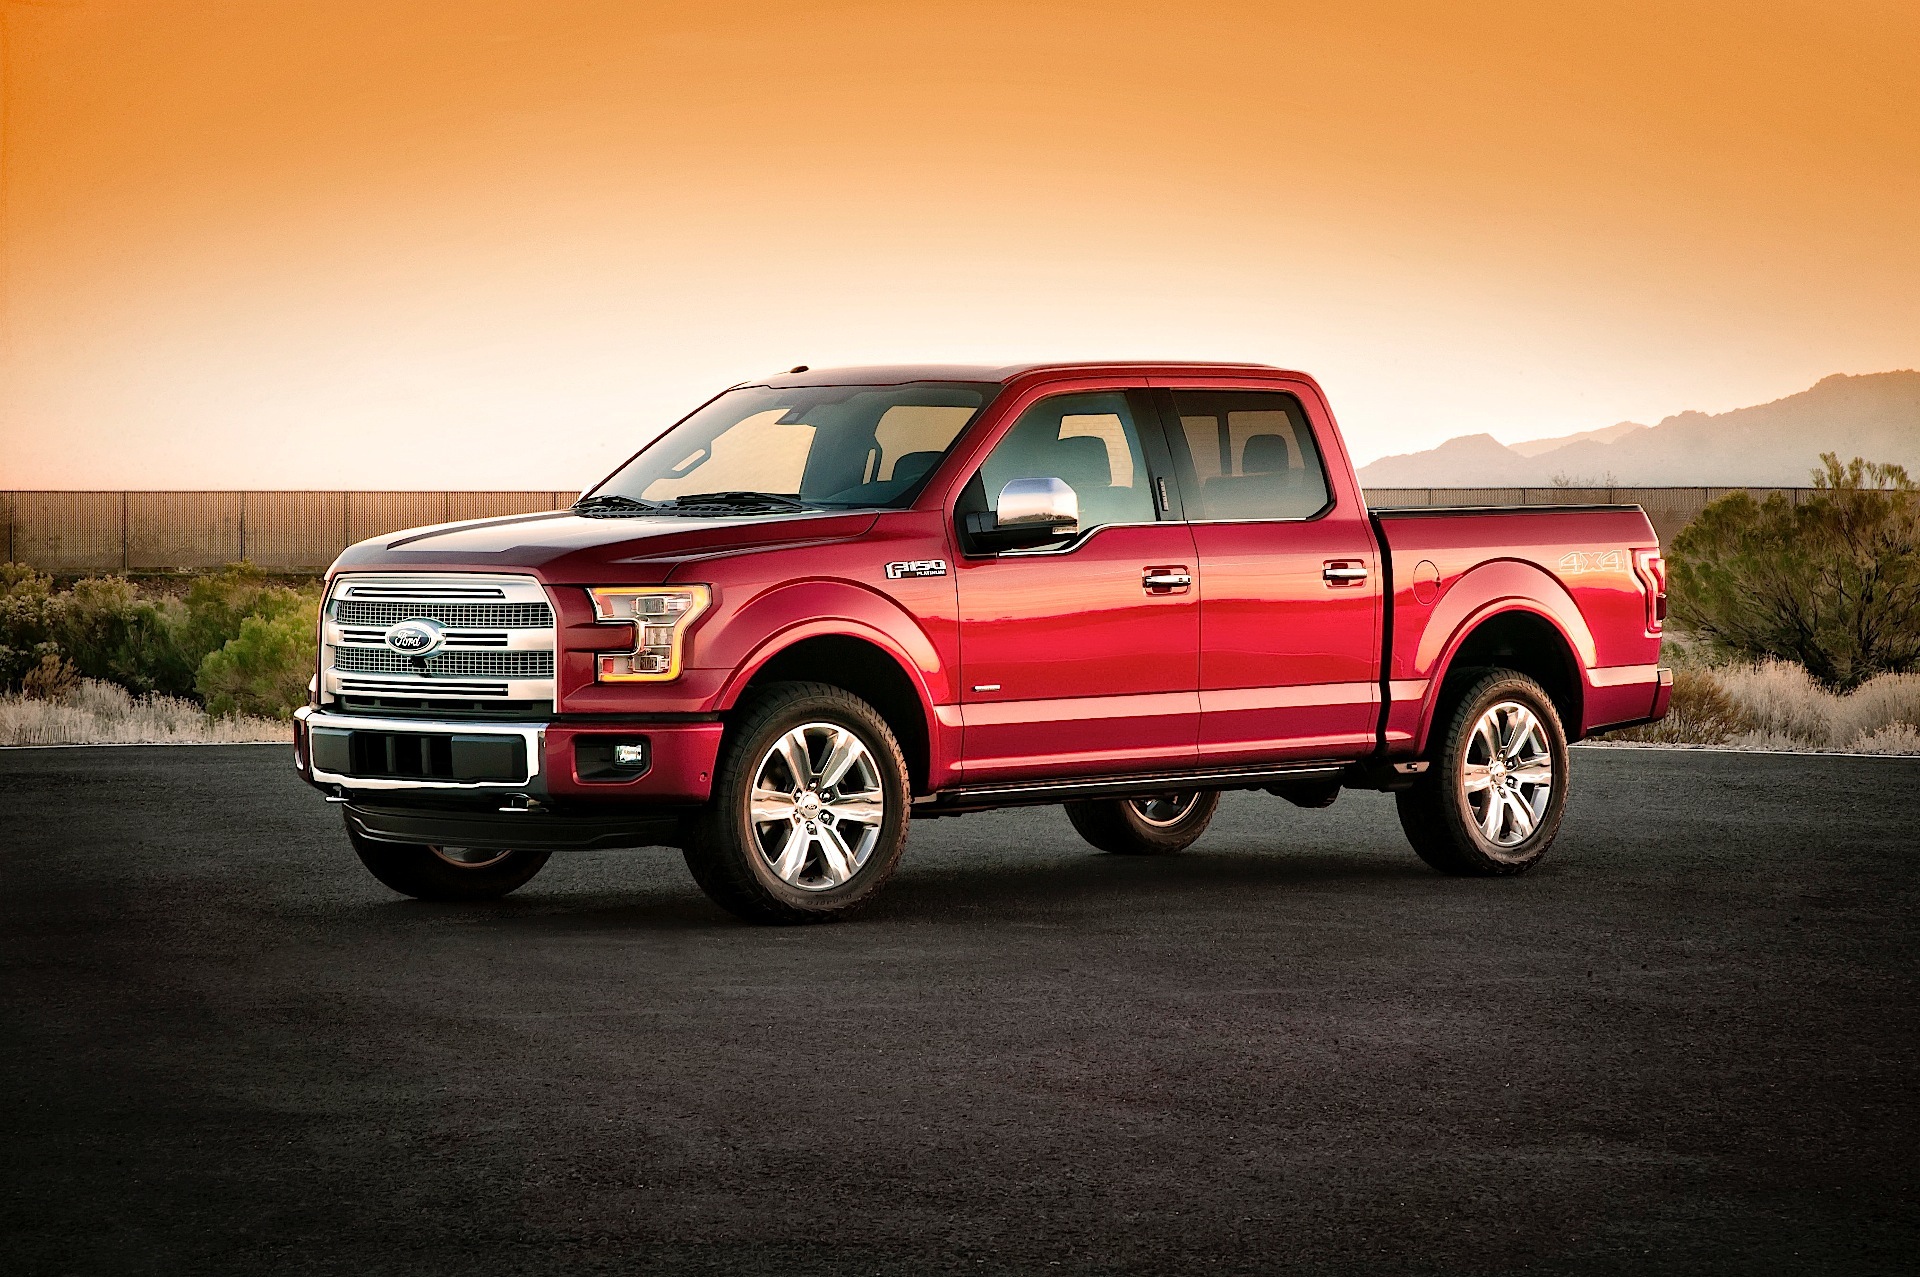 FORD F-150 Super Crew specs & photos - 2014, 2015, 2016, 2017, 2018 2010 Ford F 150 5.4 Towing Capacity